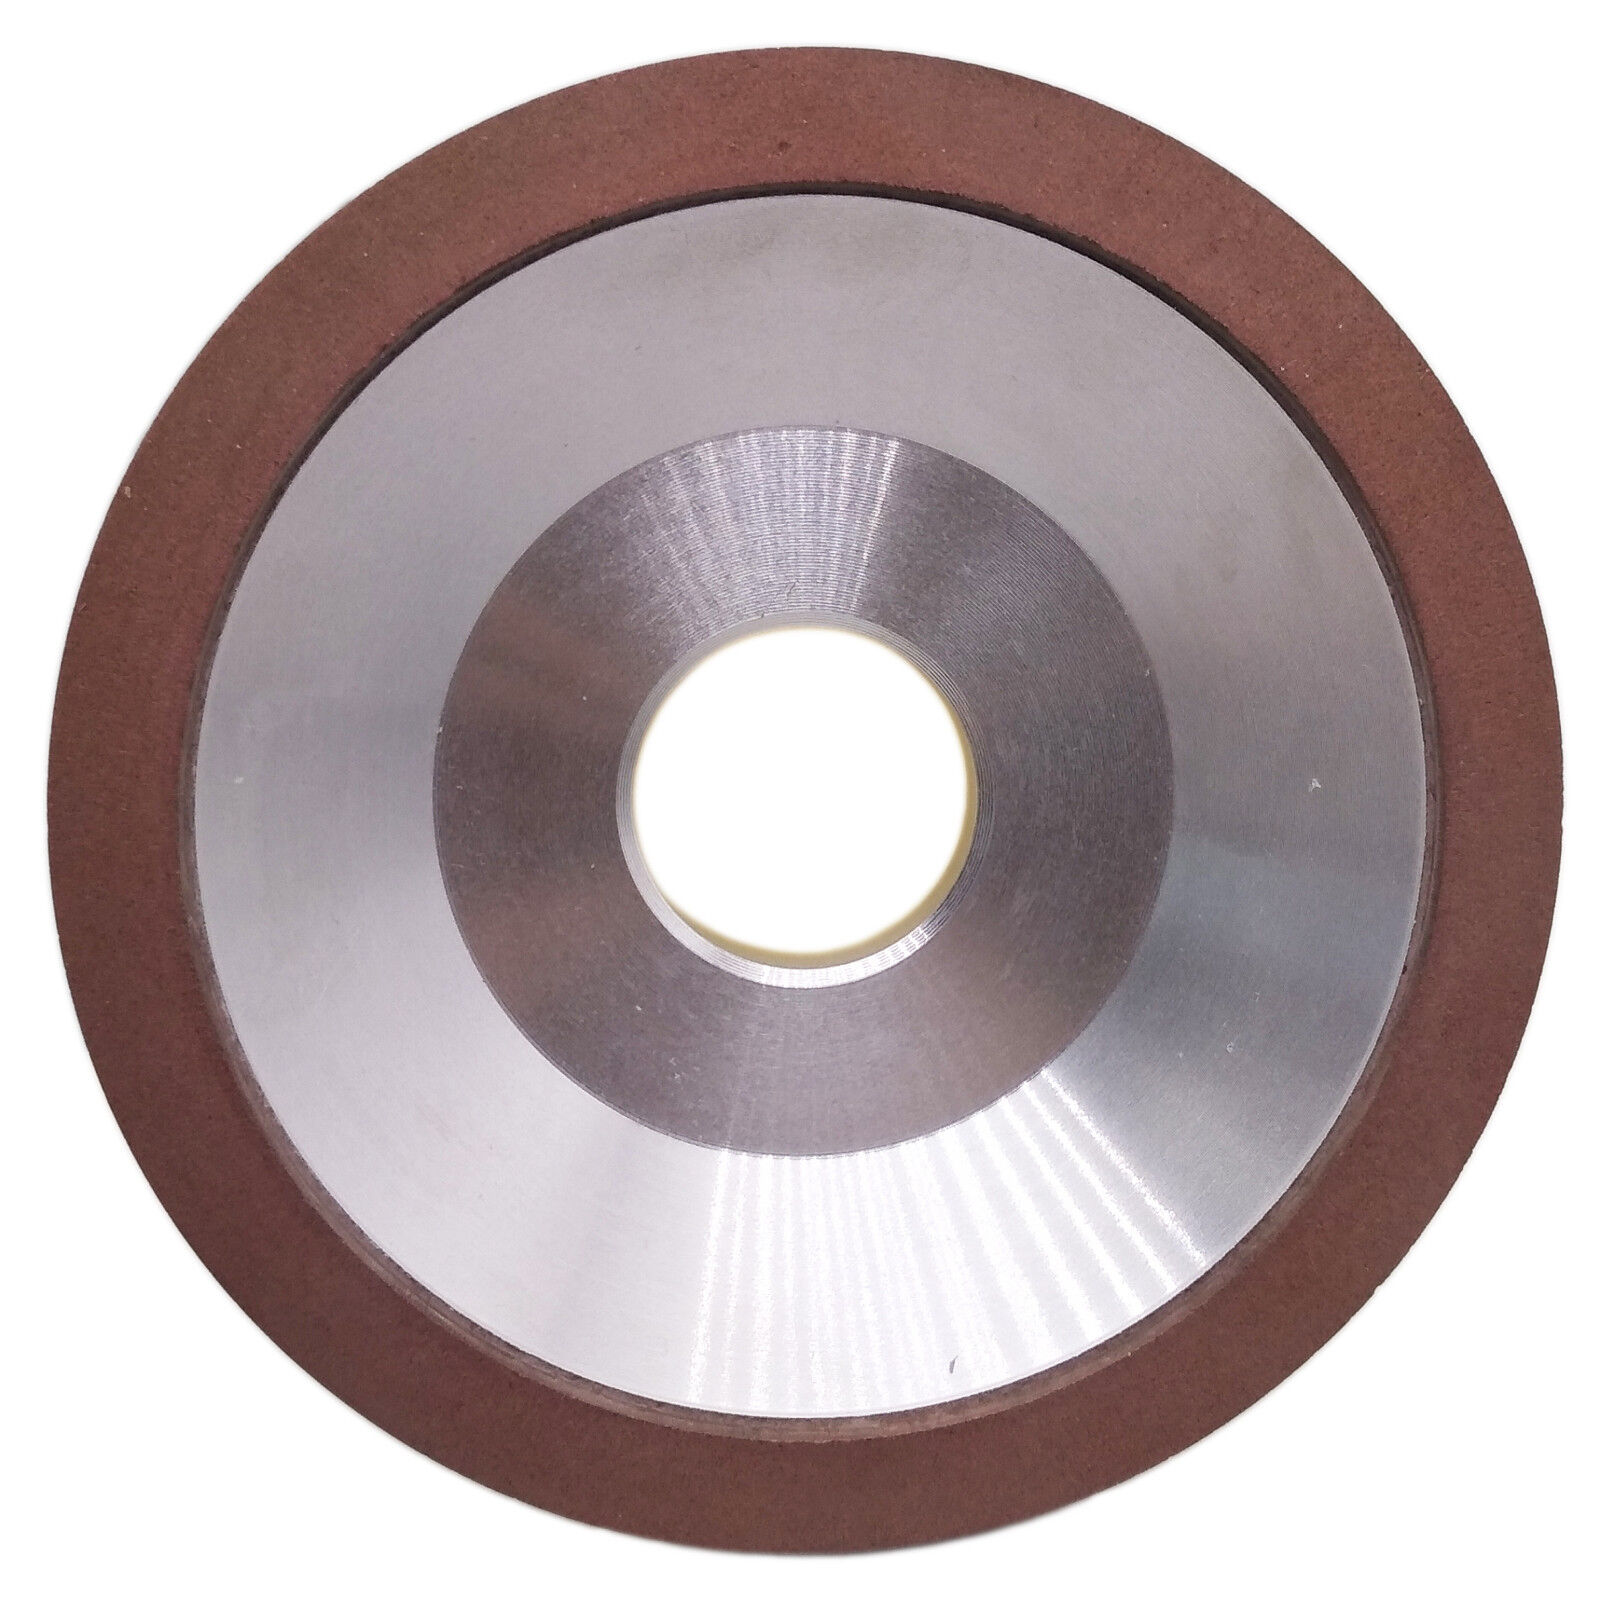 US Stock 100mm Diamond Grinding Wheel Cup 240 Grit Cutter For Carbide Metal